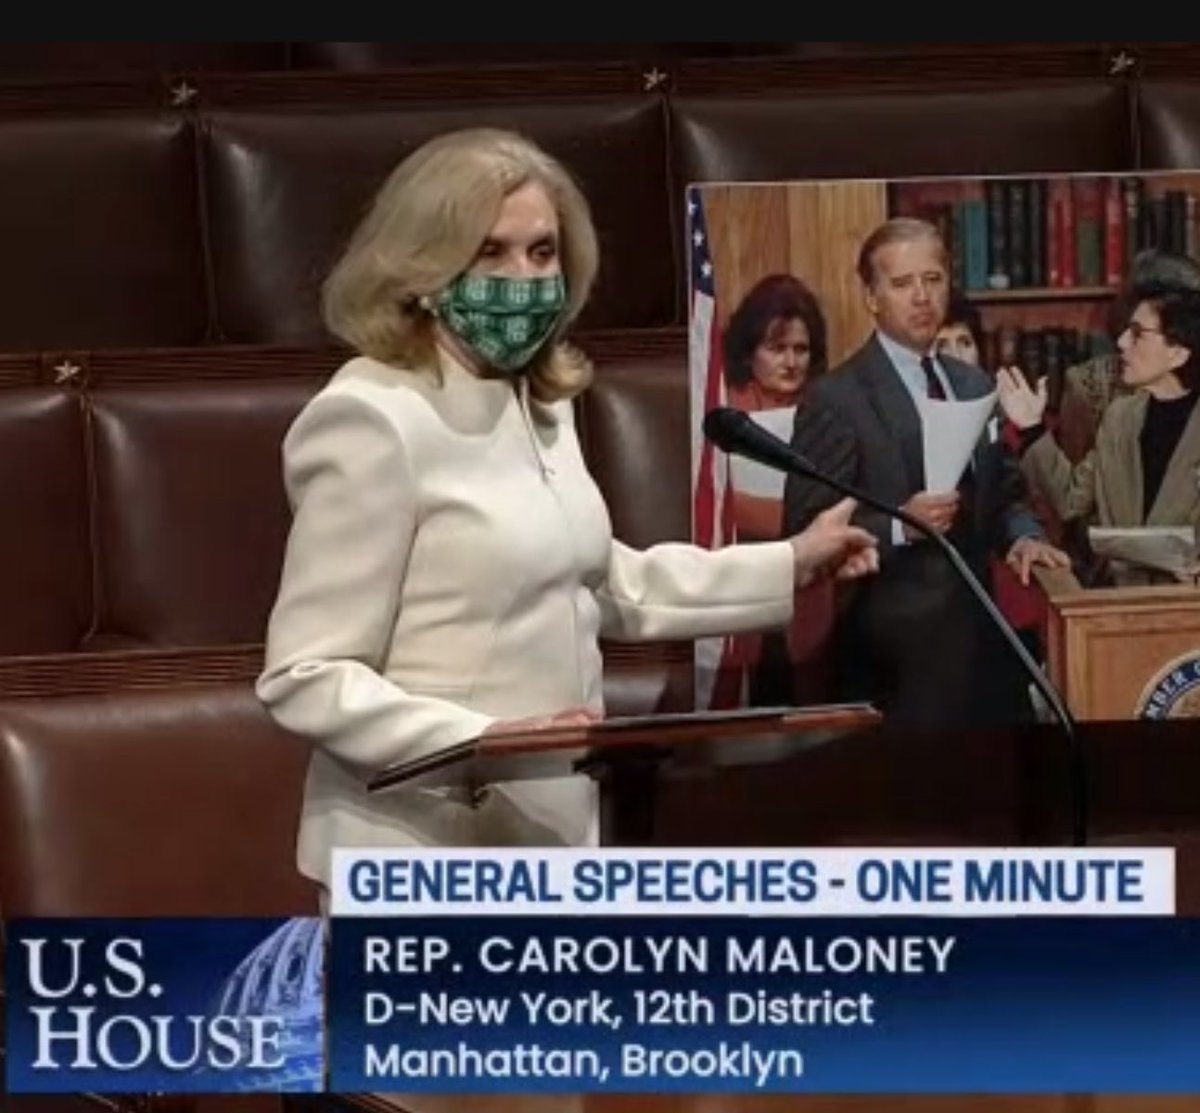 And wearing our #ERAYES masks we sent Congress! So excited to see HJRes17 being voted on today! #ERANow